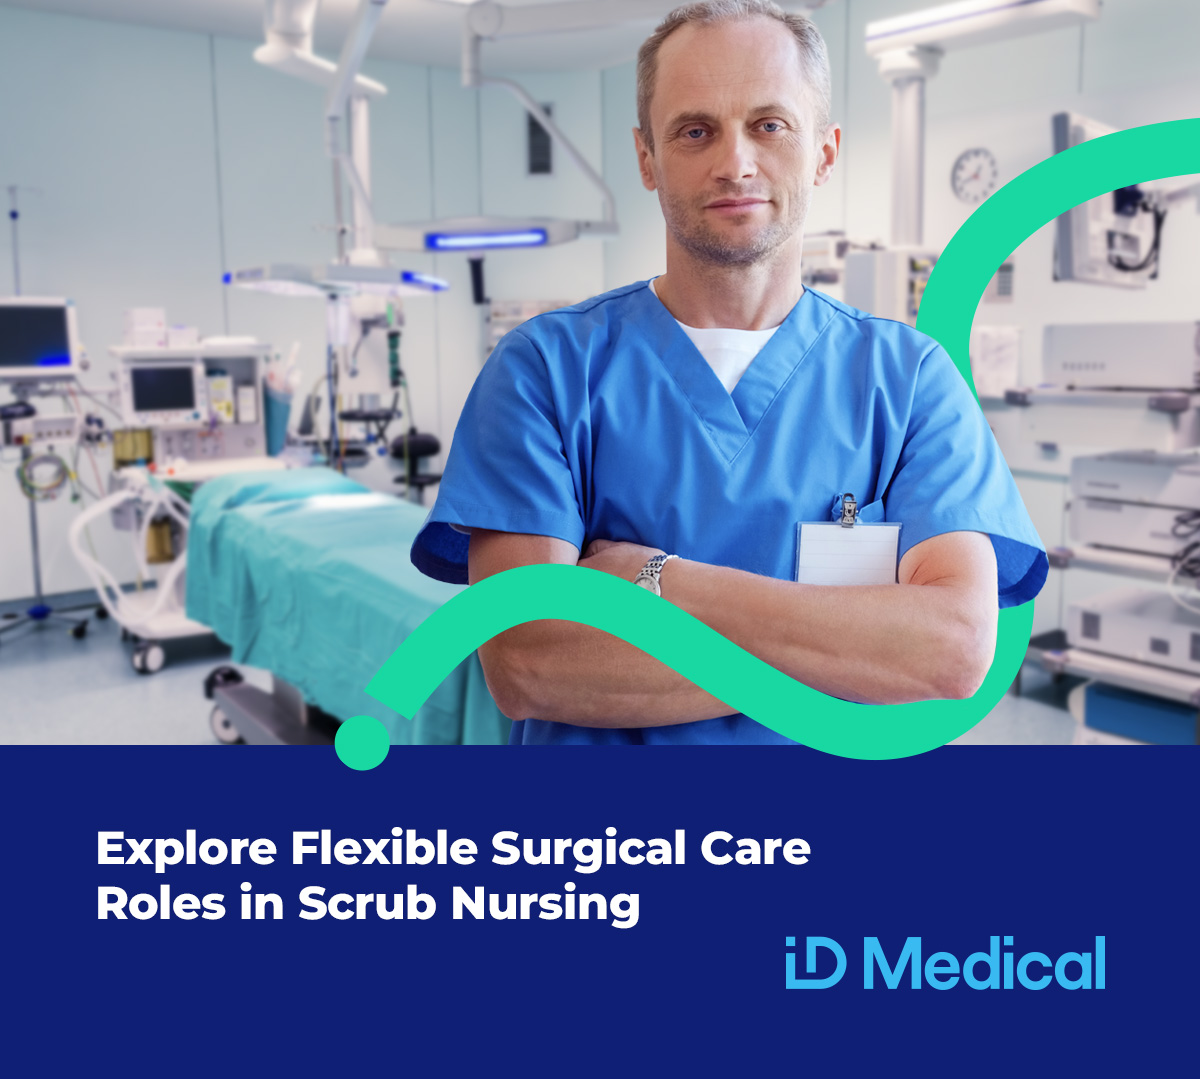 Access a wide range of Scrub Nursing opportunities. 

At ID Medical, we have access to flexible, exciting temporary roles where you can work where you want, when you want. 

Explore now: hubs.la/Q02swRYz0

#ScrubNursing #SurgicalExcellence #OperatingRoomNurse